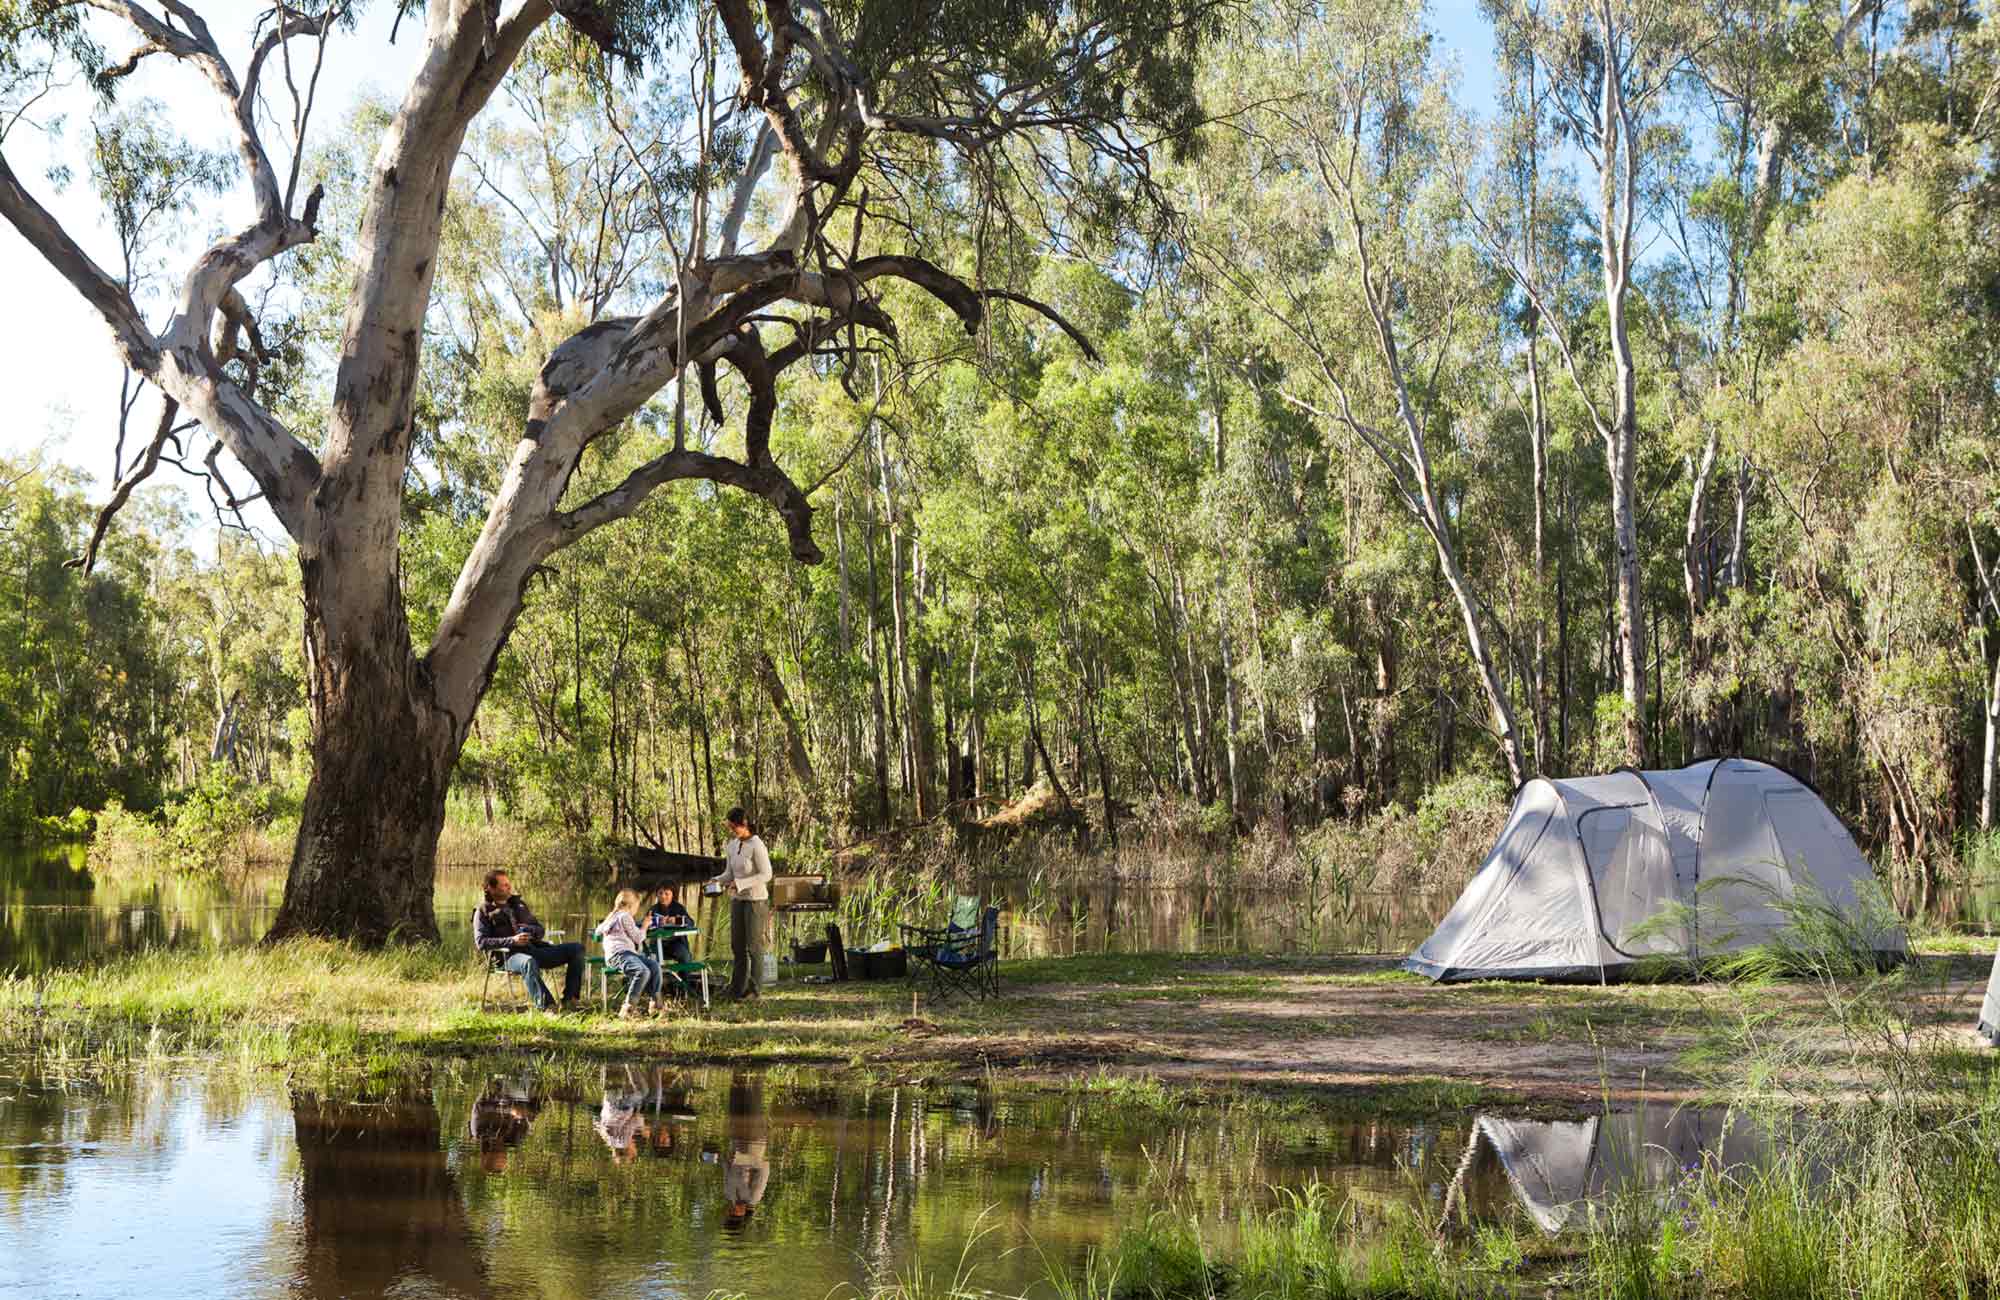 People camping by the river. Photo:David Finnegan